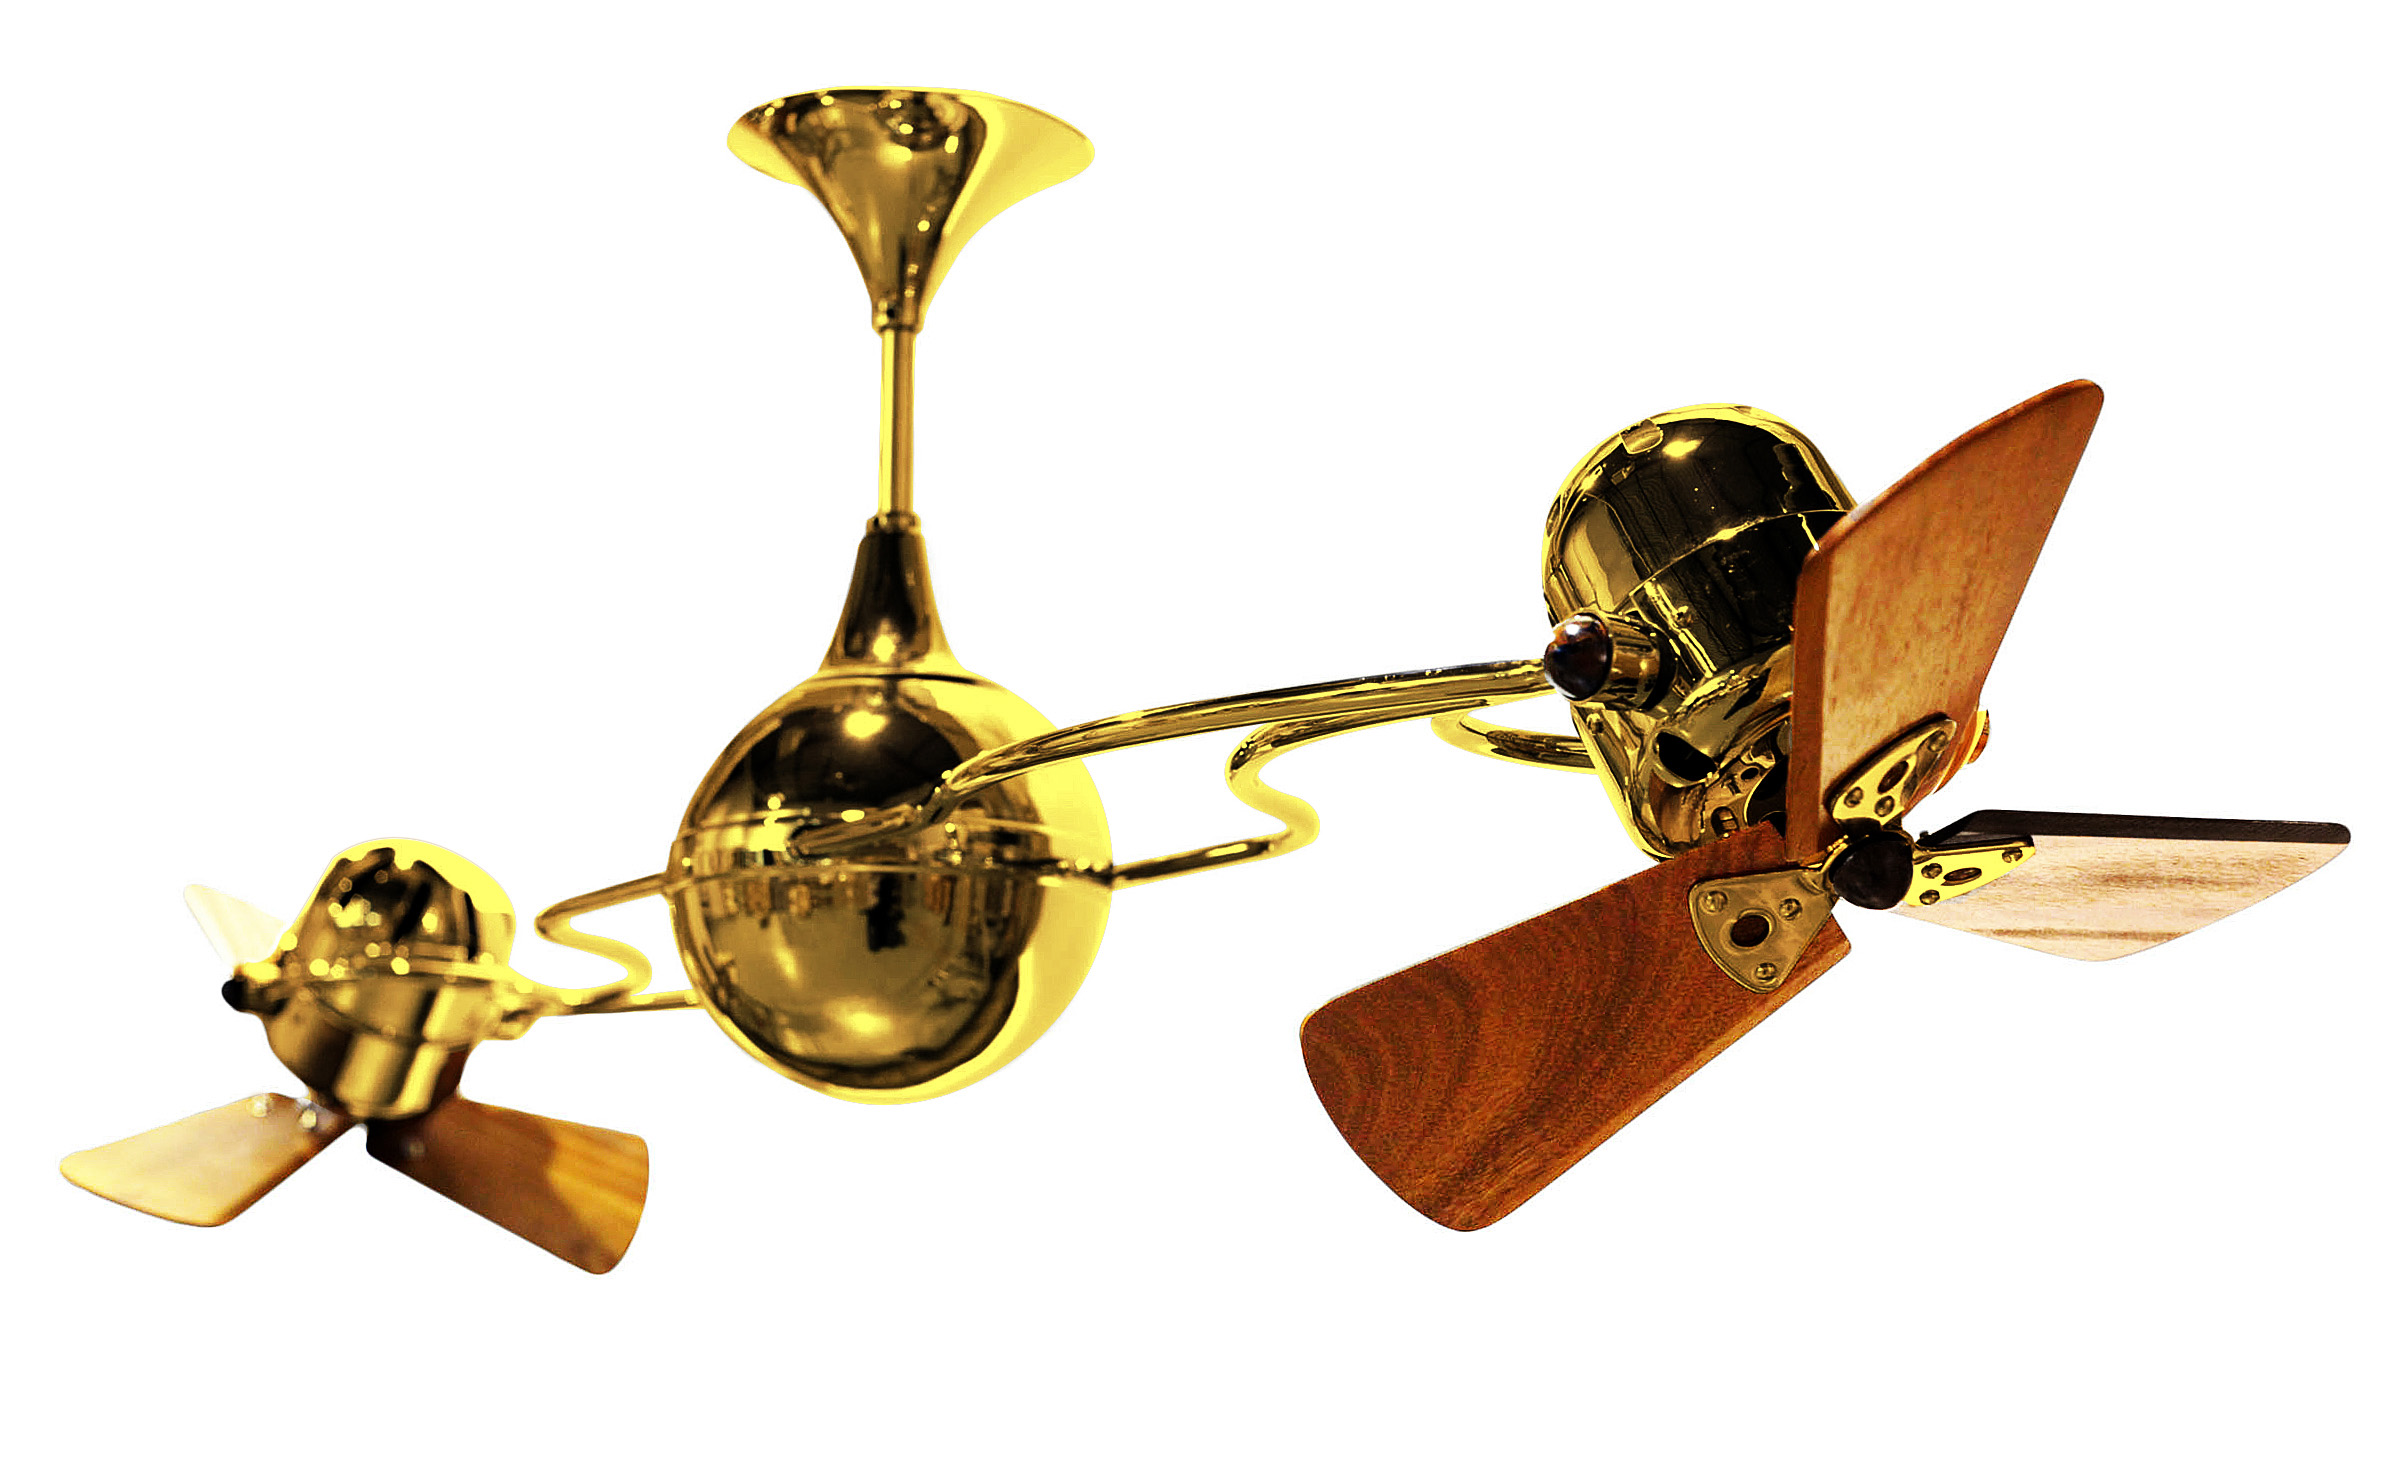 Italo Ventania Rotational Dual Head Ceiling Fan in Ouro / Gold Finish with Mahogany Wood Blades